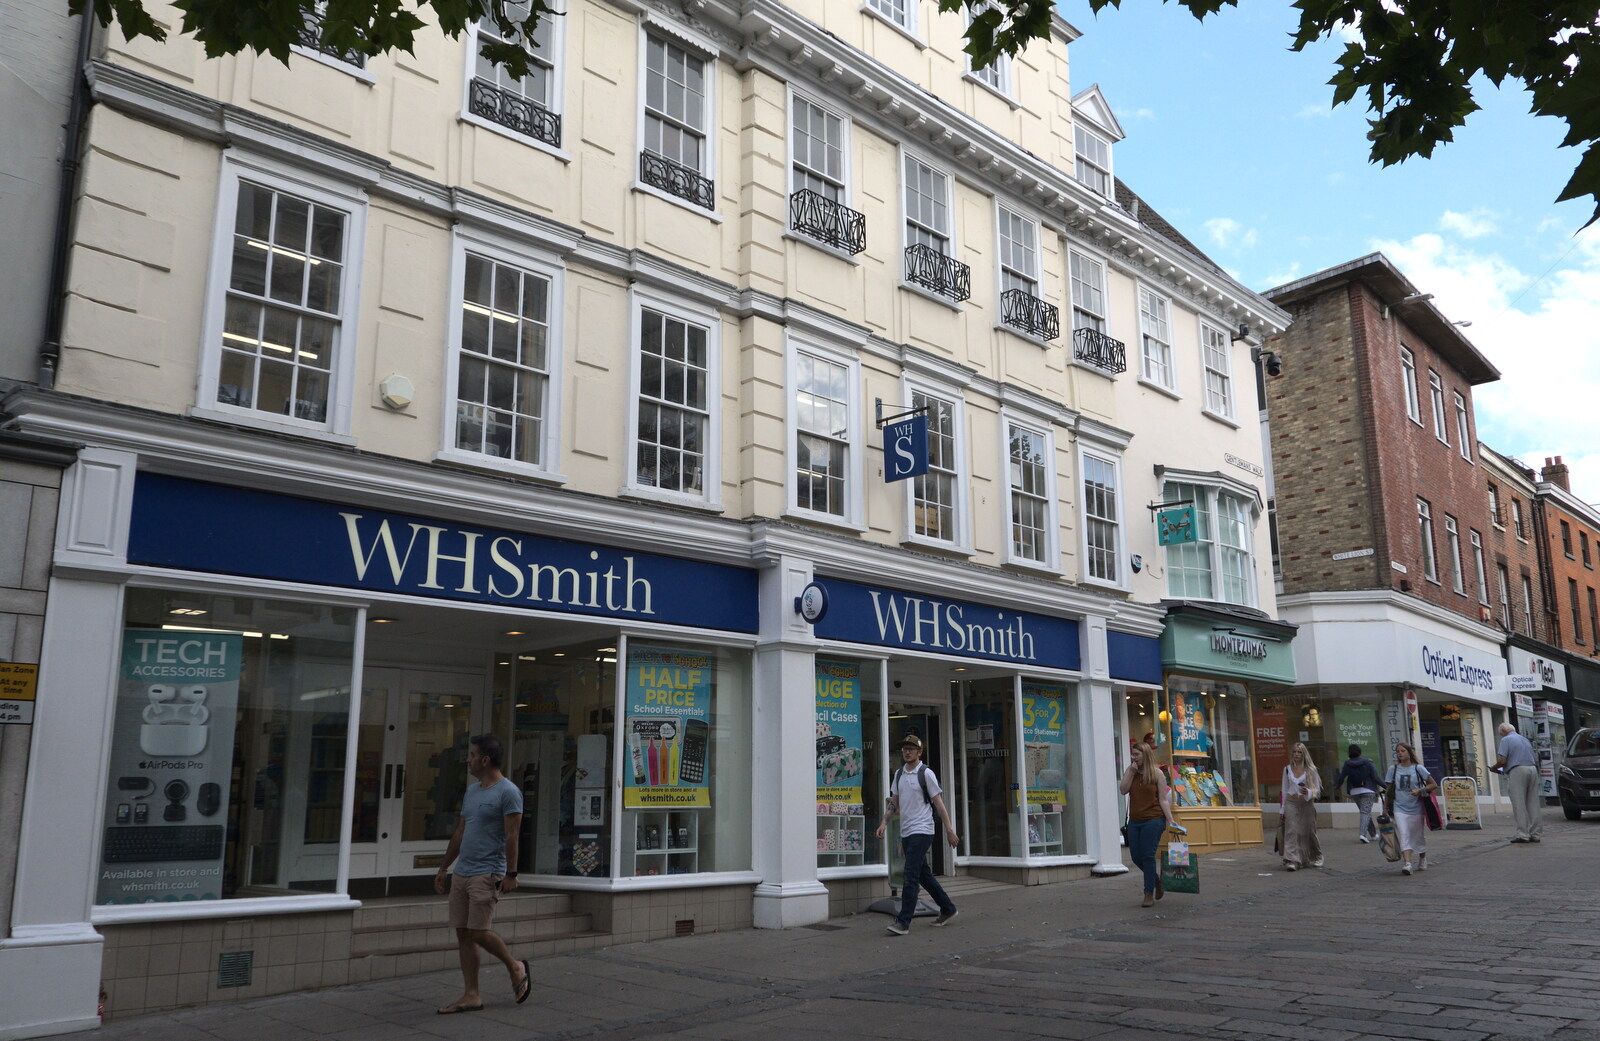 A Norwich Trip, and Rob Folkard and Jo at The Bank, Eye, Suffolk - 20th August 2022: WHSmith is in quite a grand building